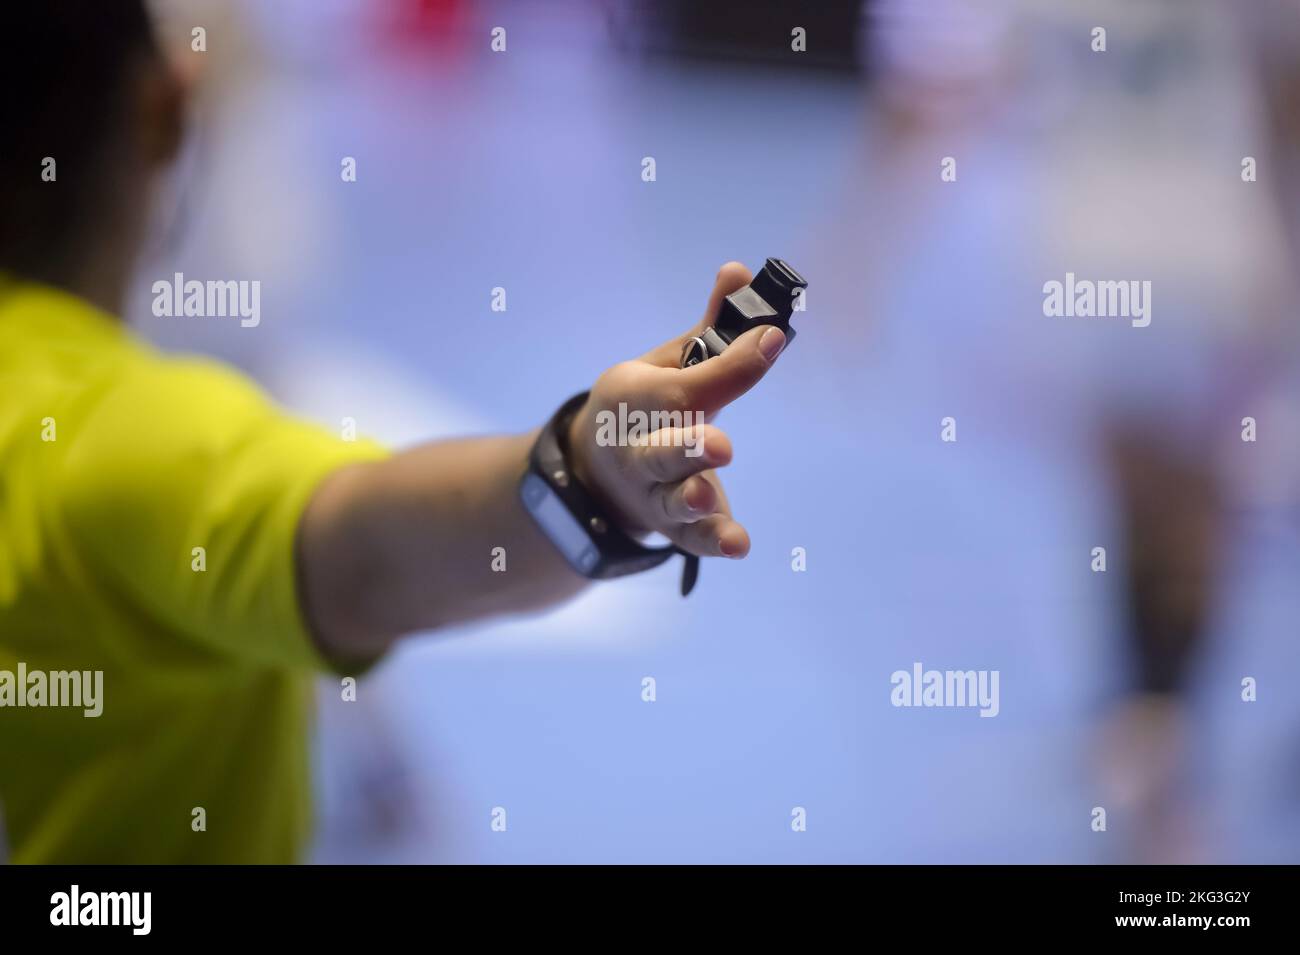 Shallow depth of field with handball referee hand holding a whistle signaling a foul Stock Photo